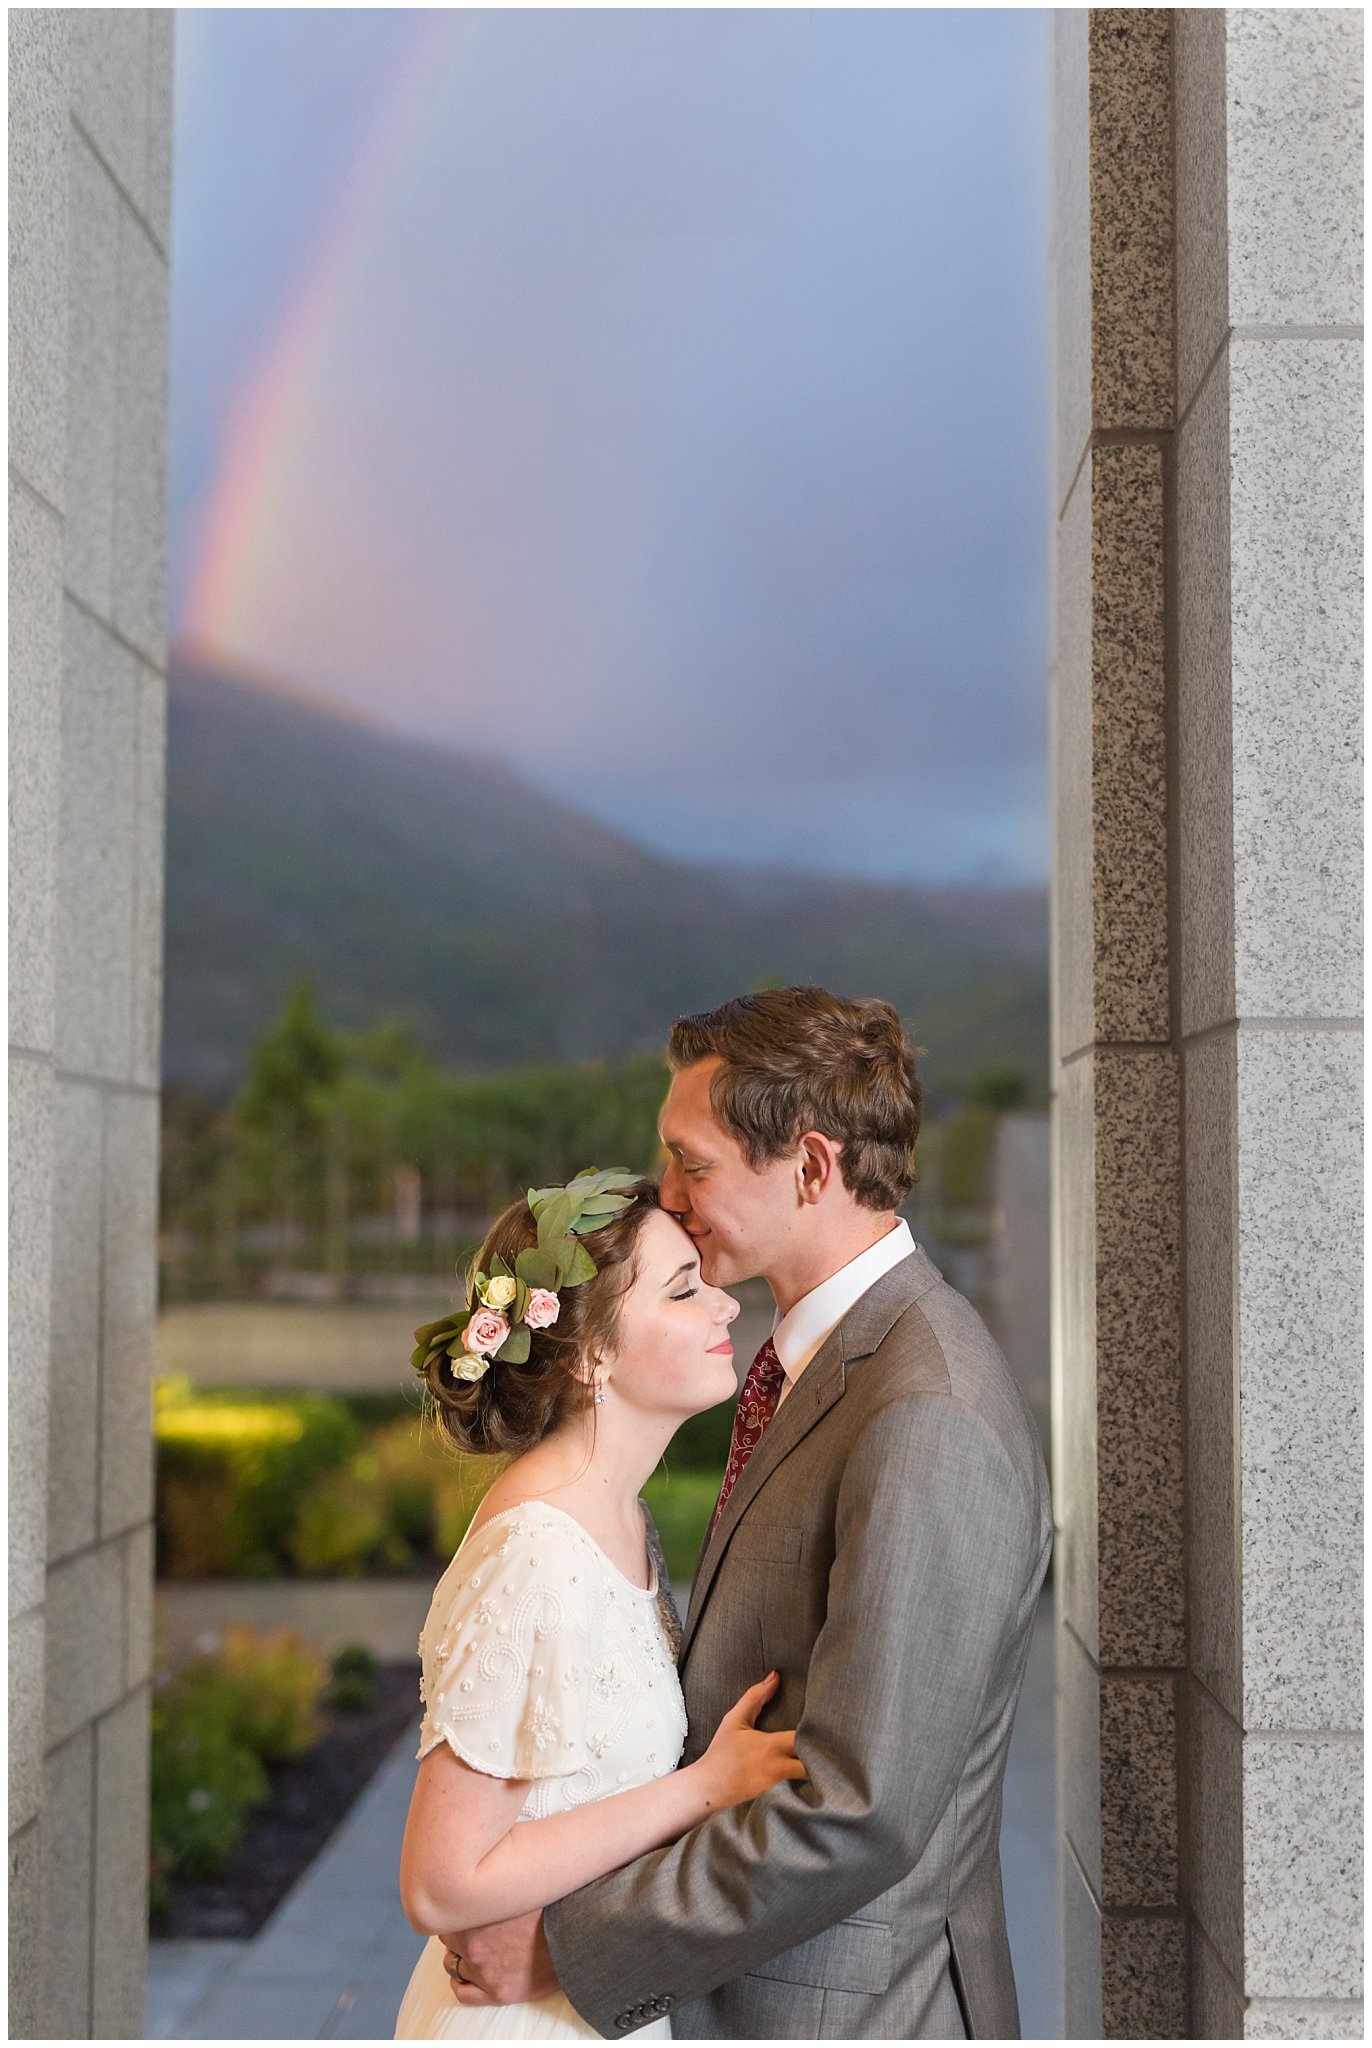 Rainbow during session with bride in flower crown and groom in grey suit with maroon tie | Grey, gold, and maroon wedding colors | Draper Temple Spring Formal Session | Jessie and Dallin Photography